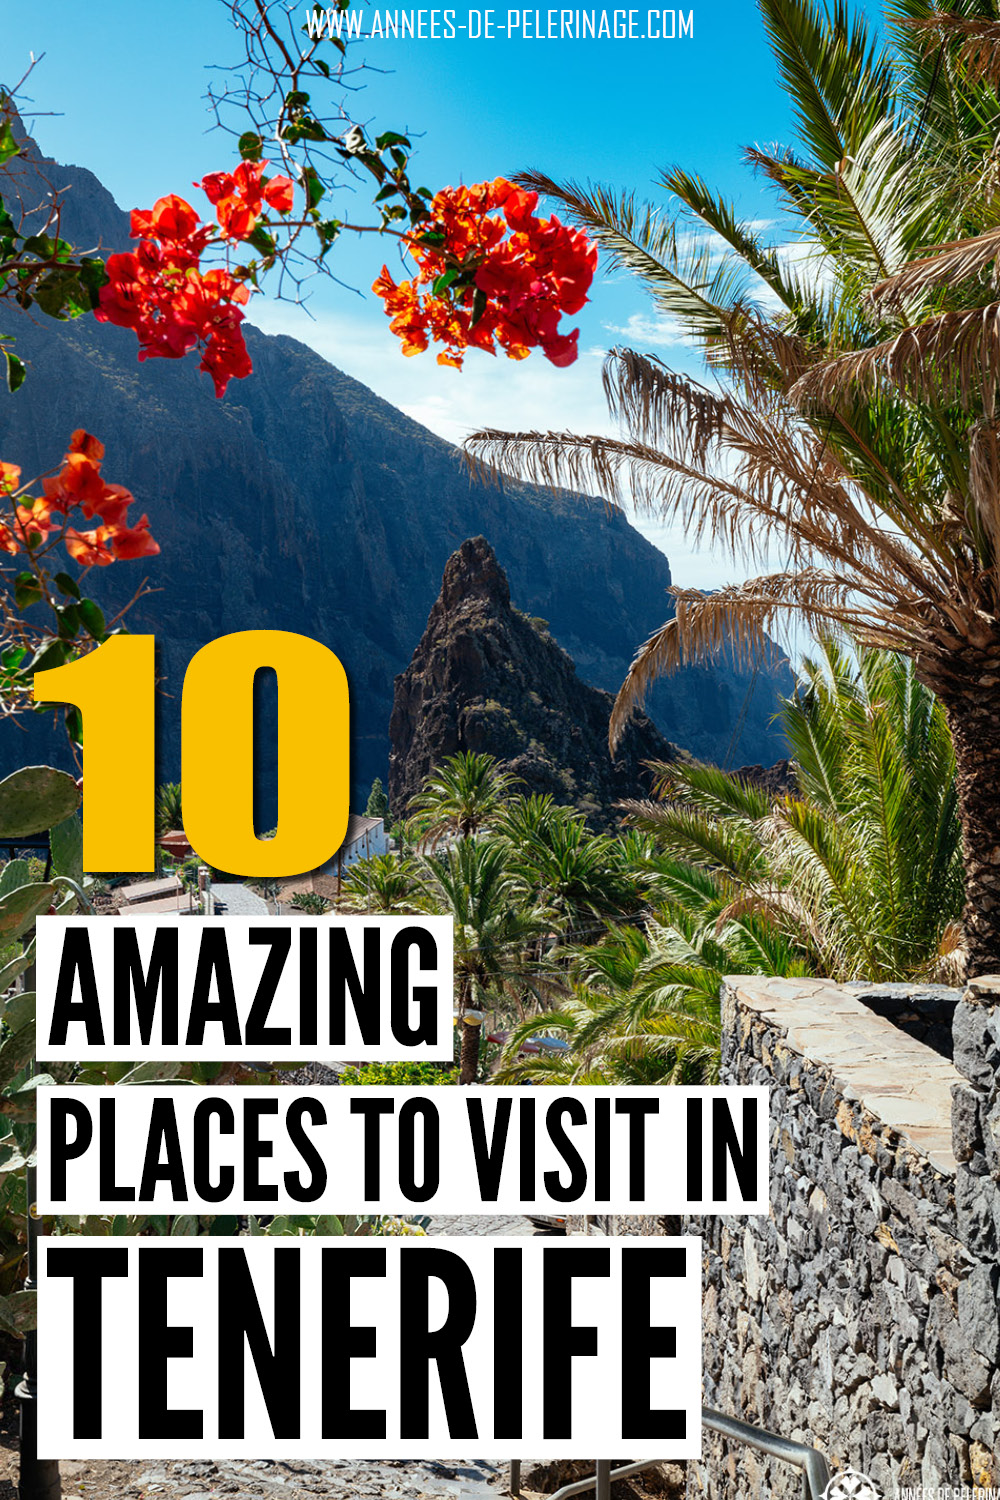 10 amazing places to visit in Tenerife